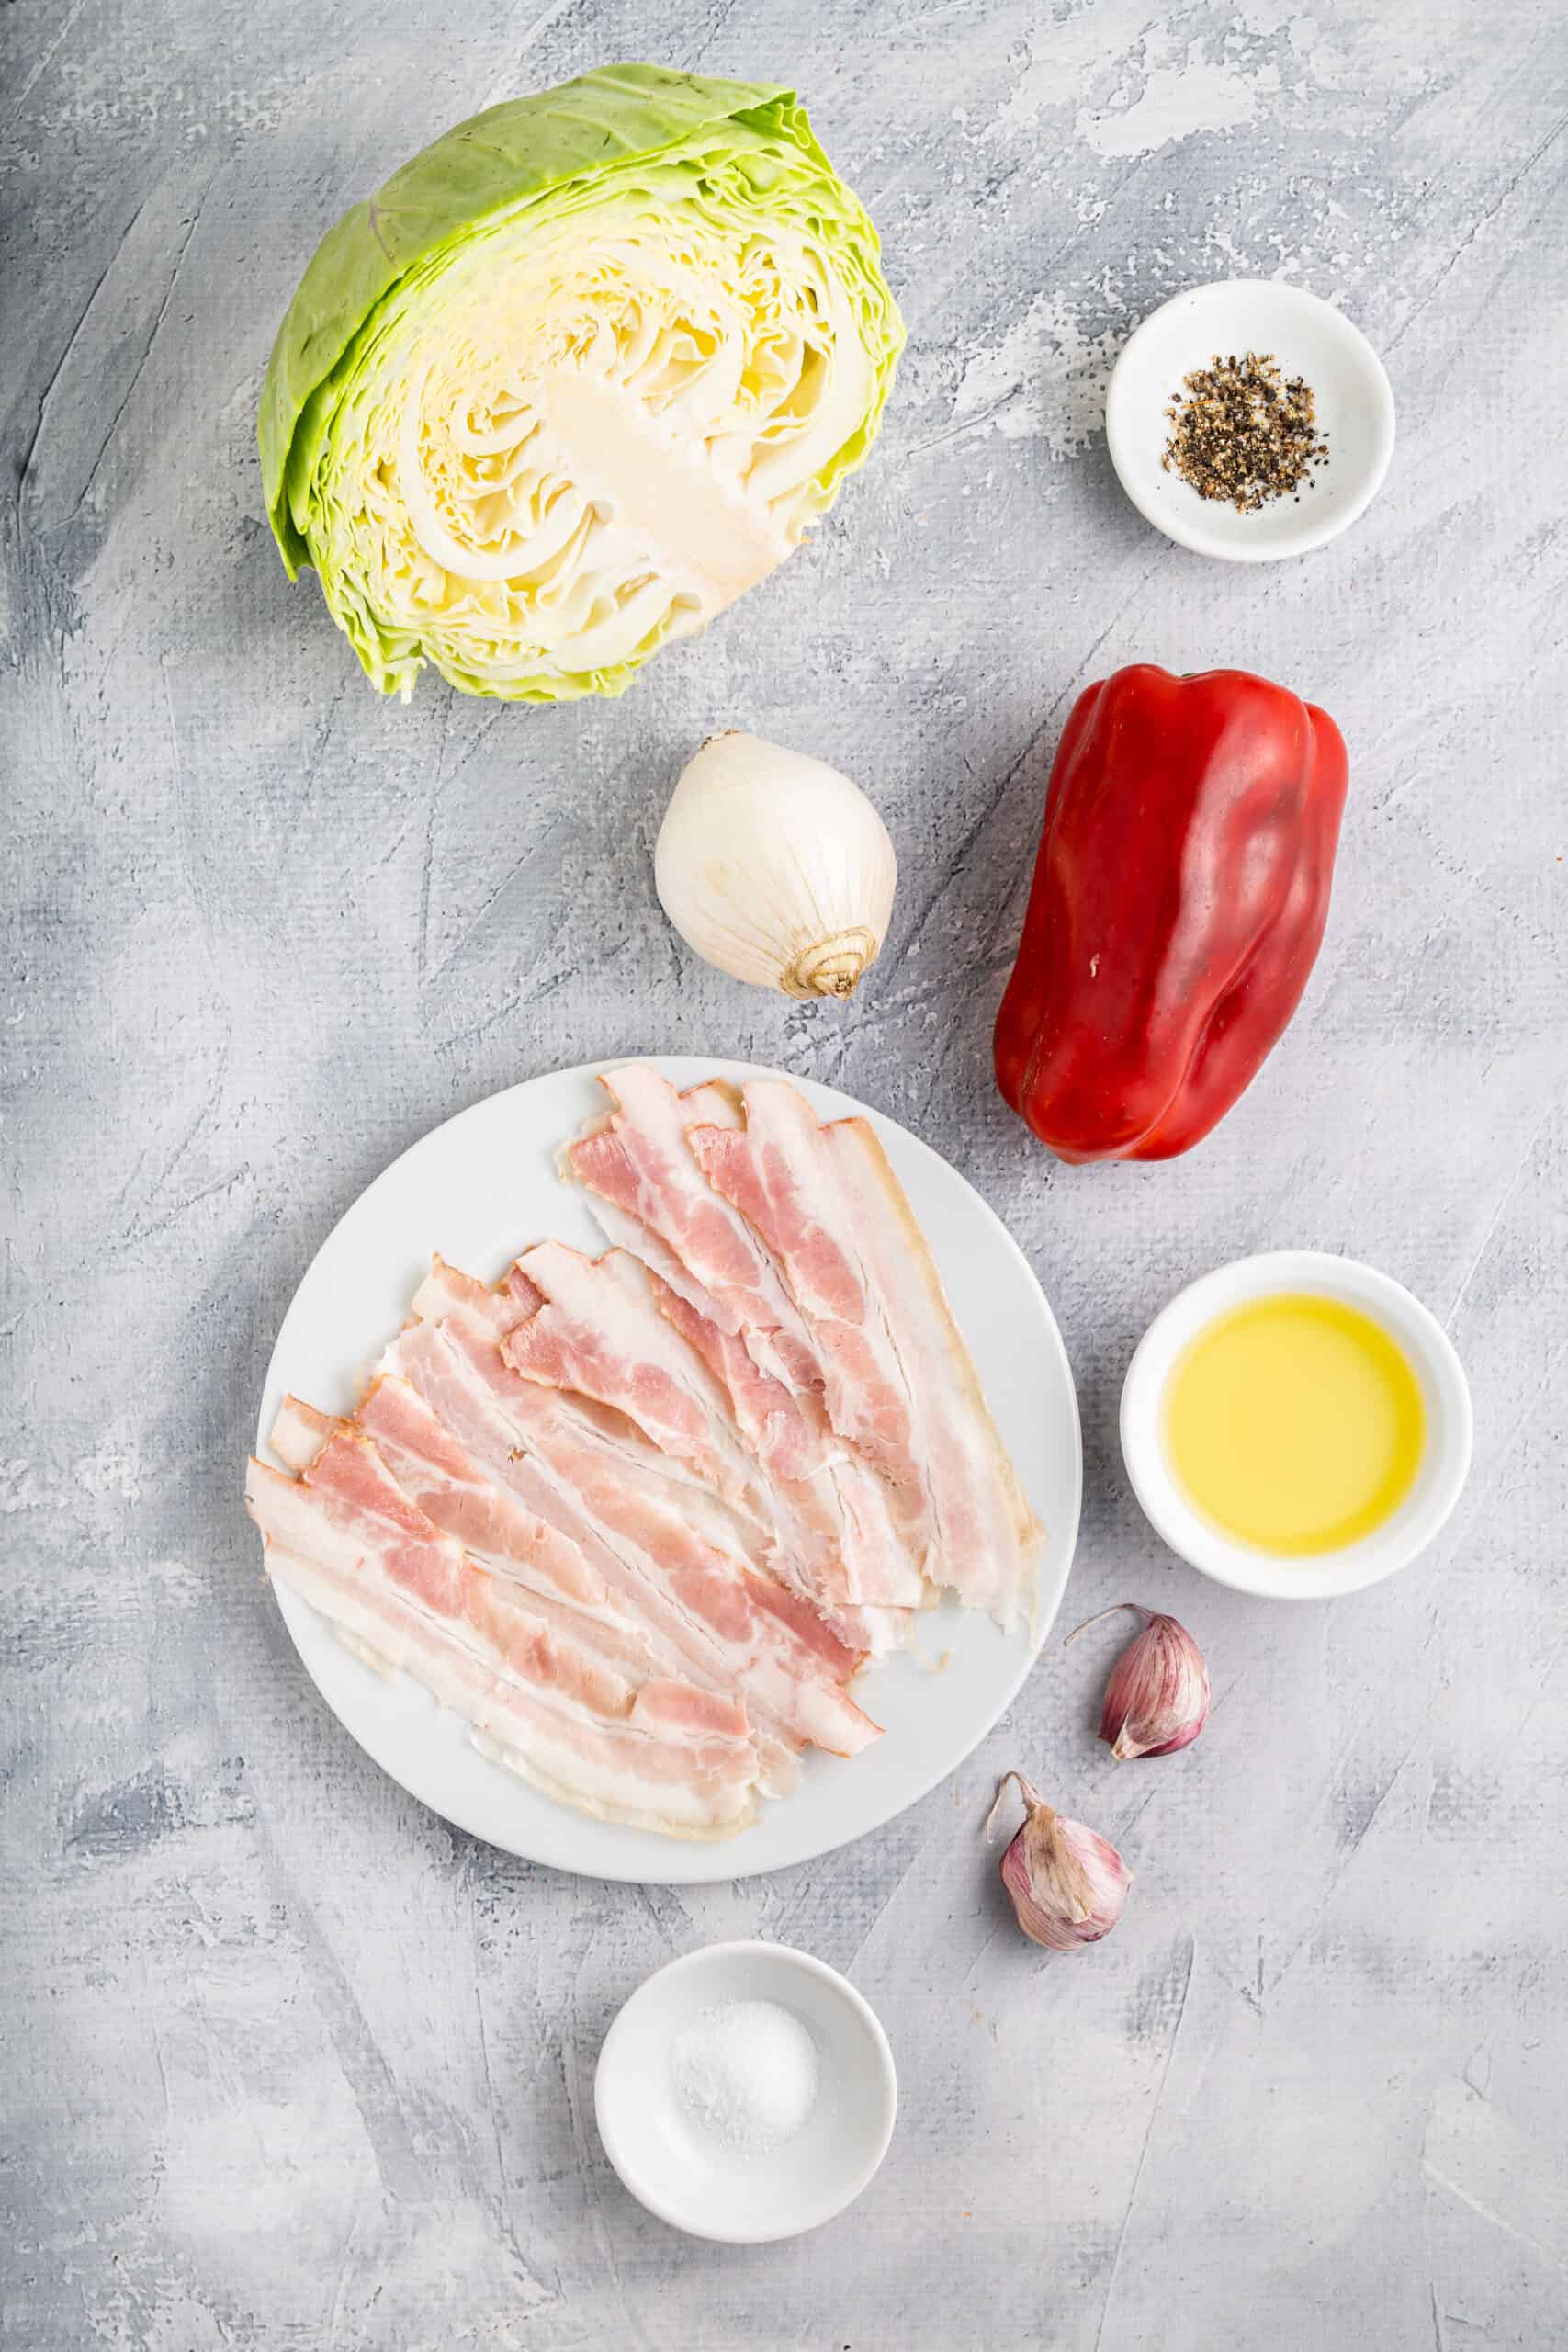 Ingredients for fried cabbage recipes with bacon